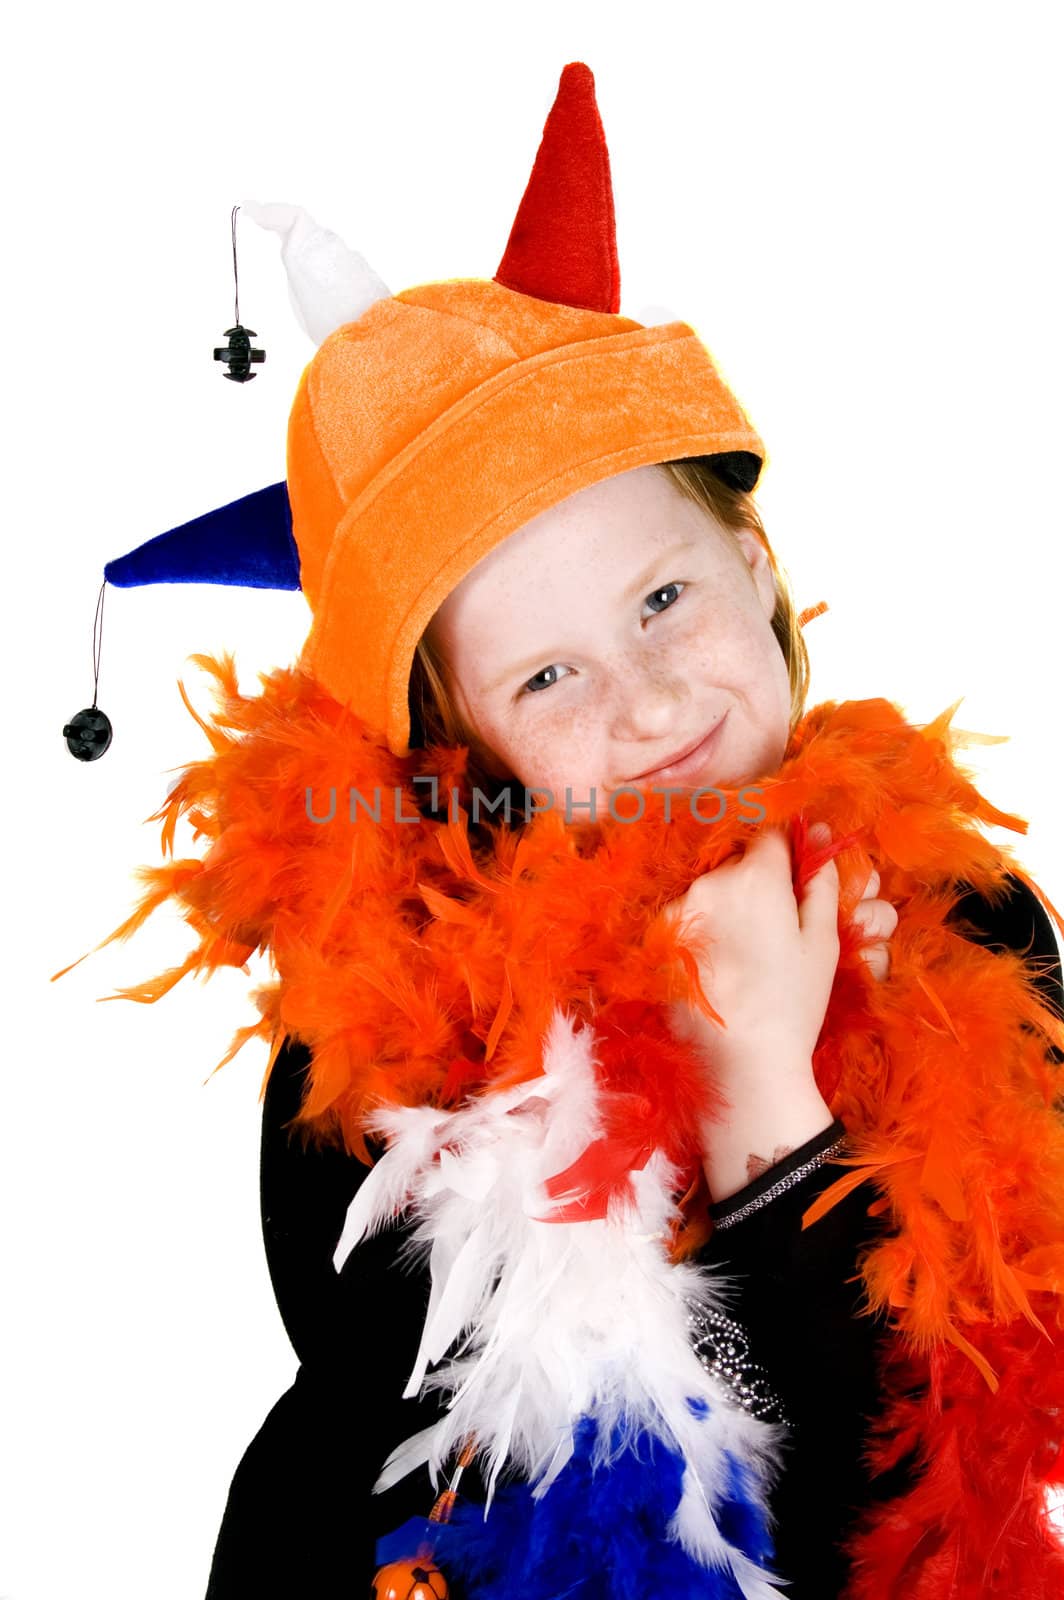 little girl ready to celebrate queensday